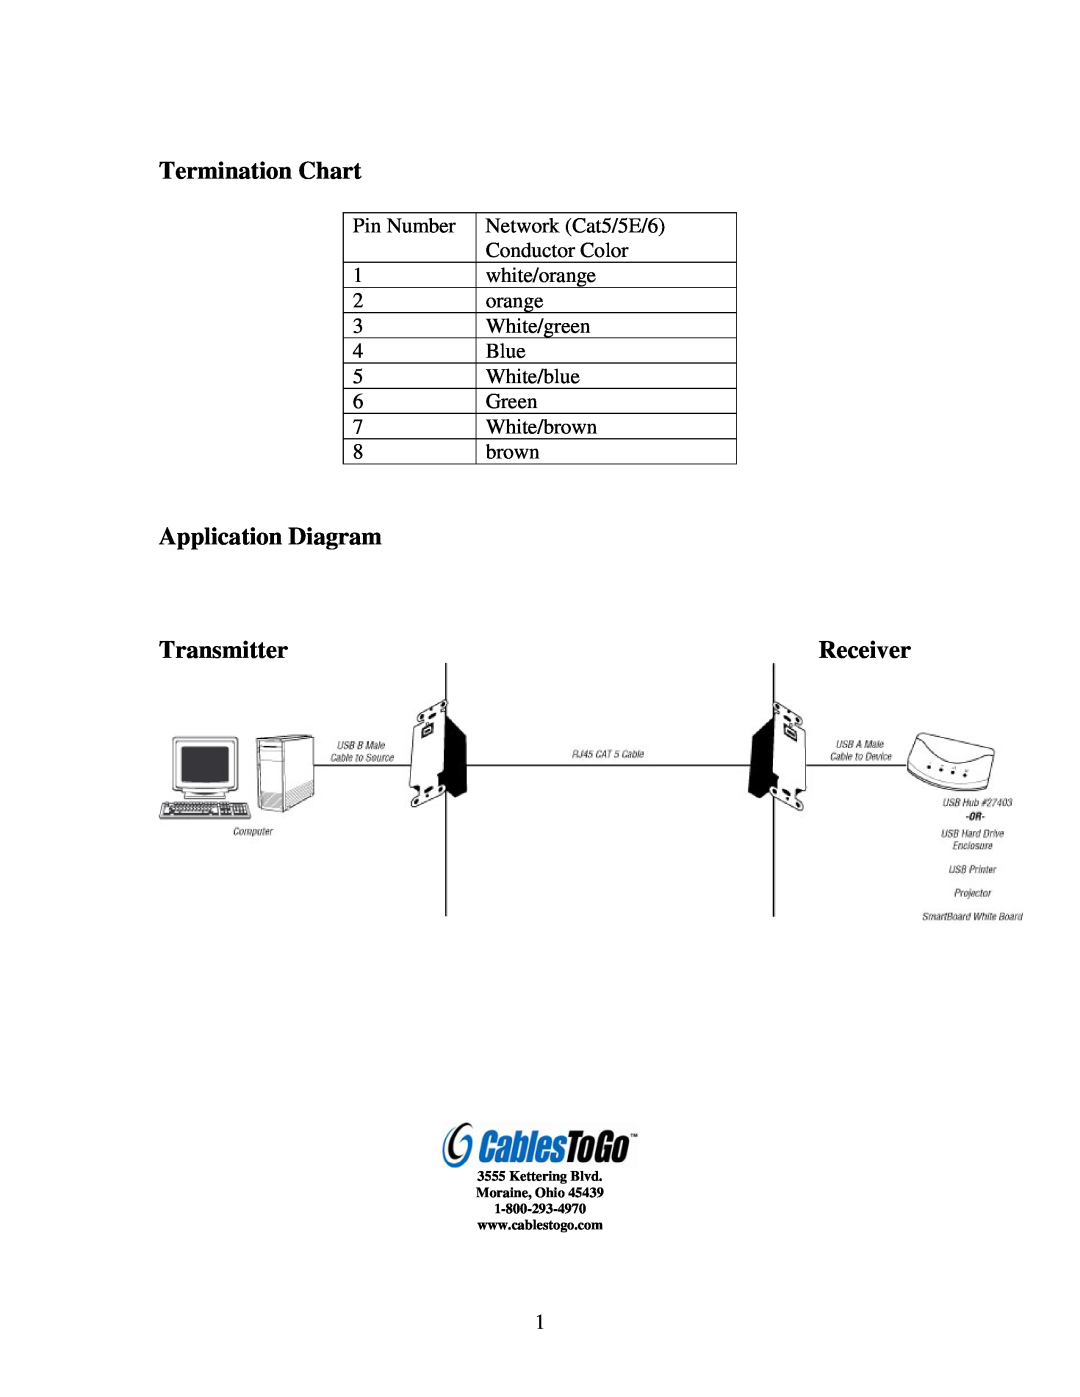 Cables to Go 29345 user manual Termination Chart, Application Diagram, Transmitter, Receiver 